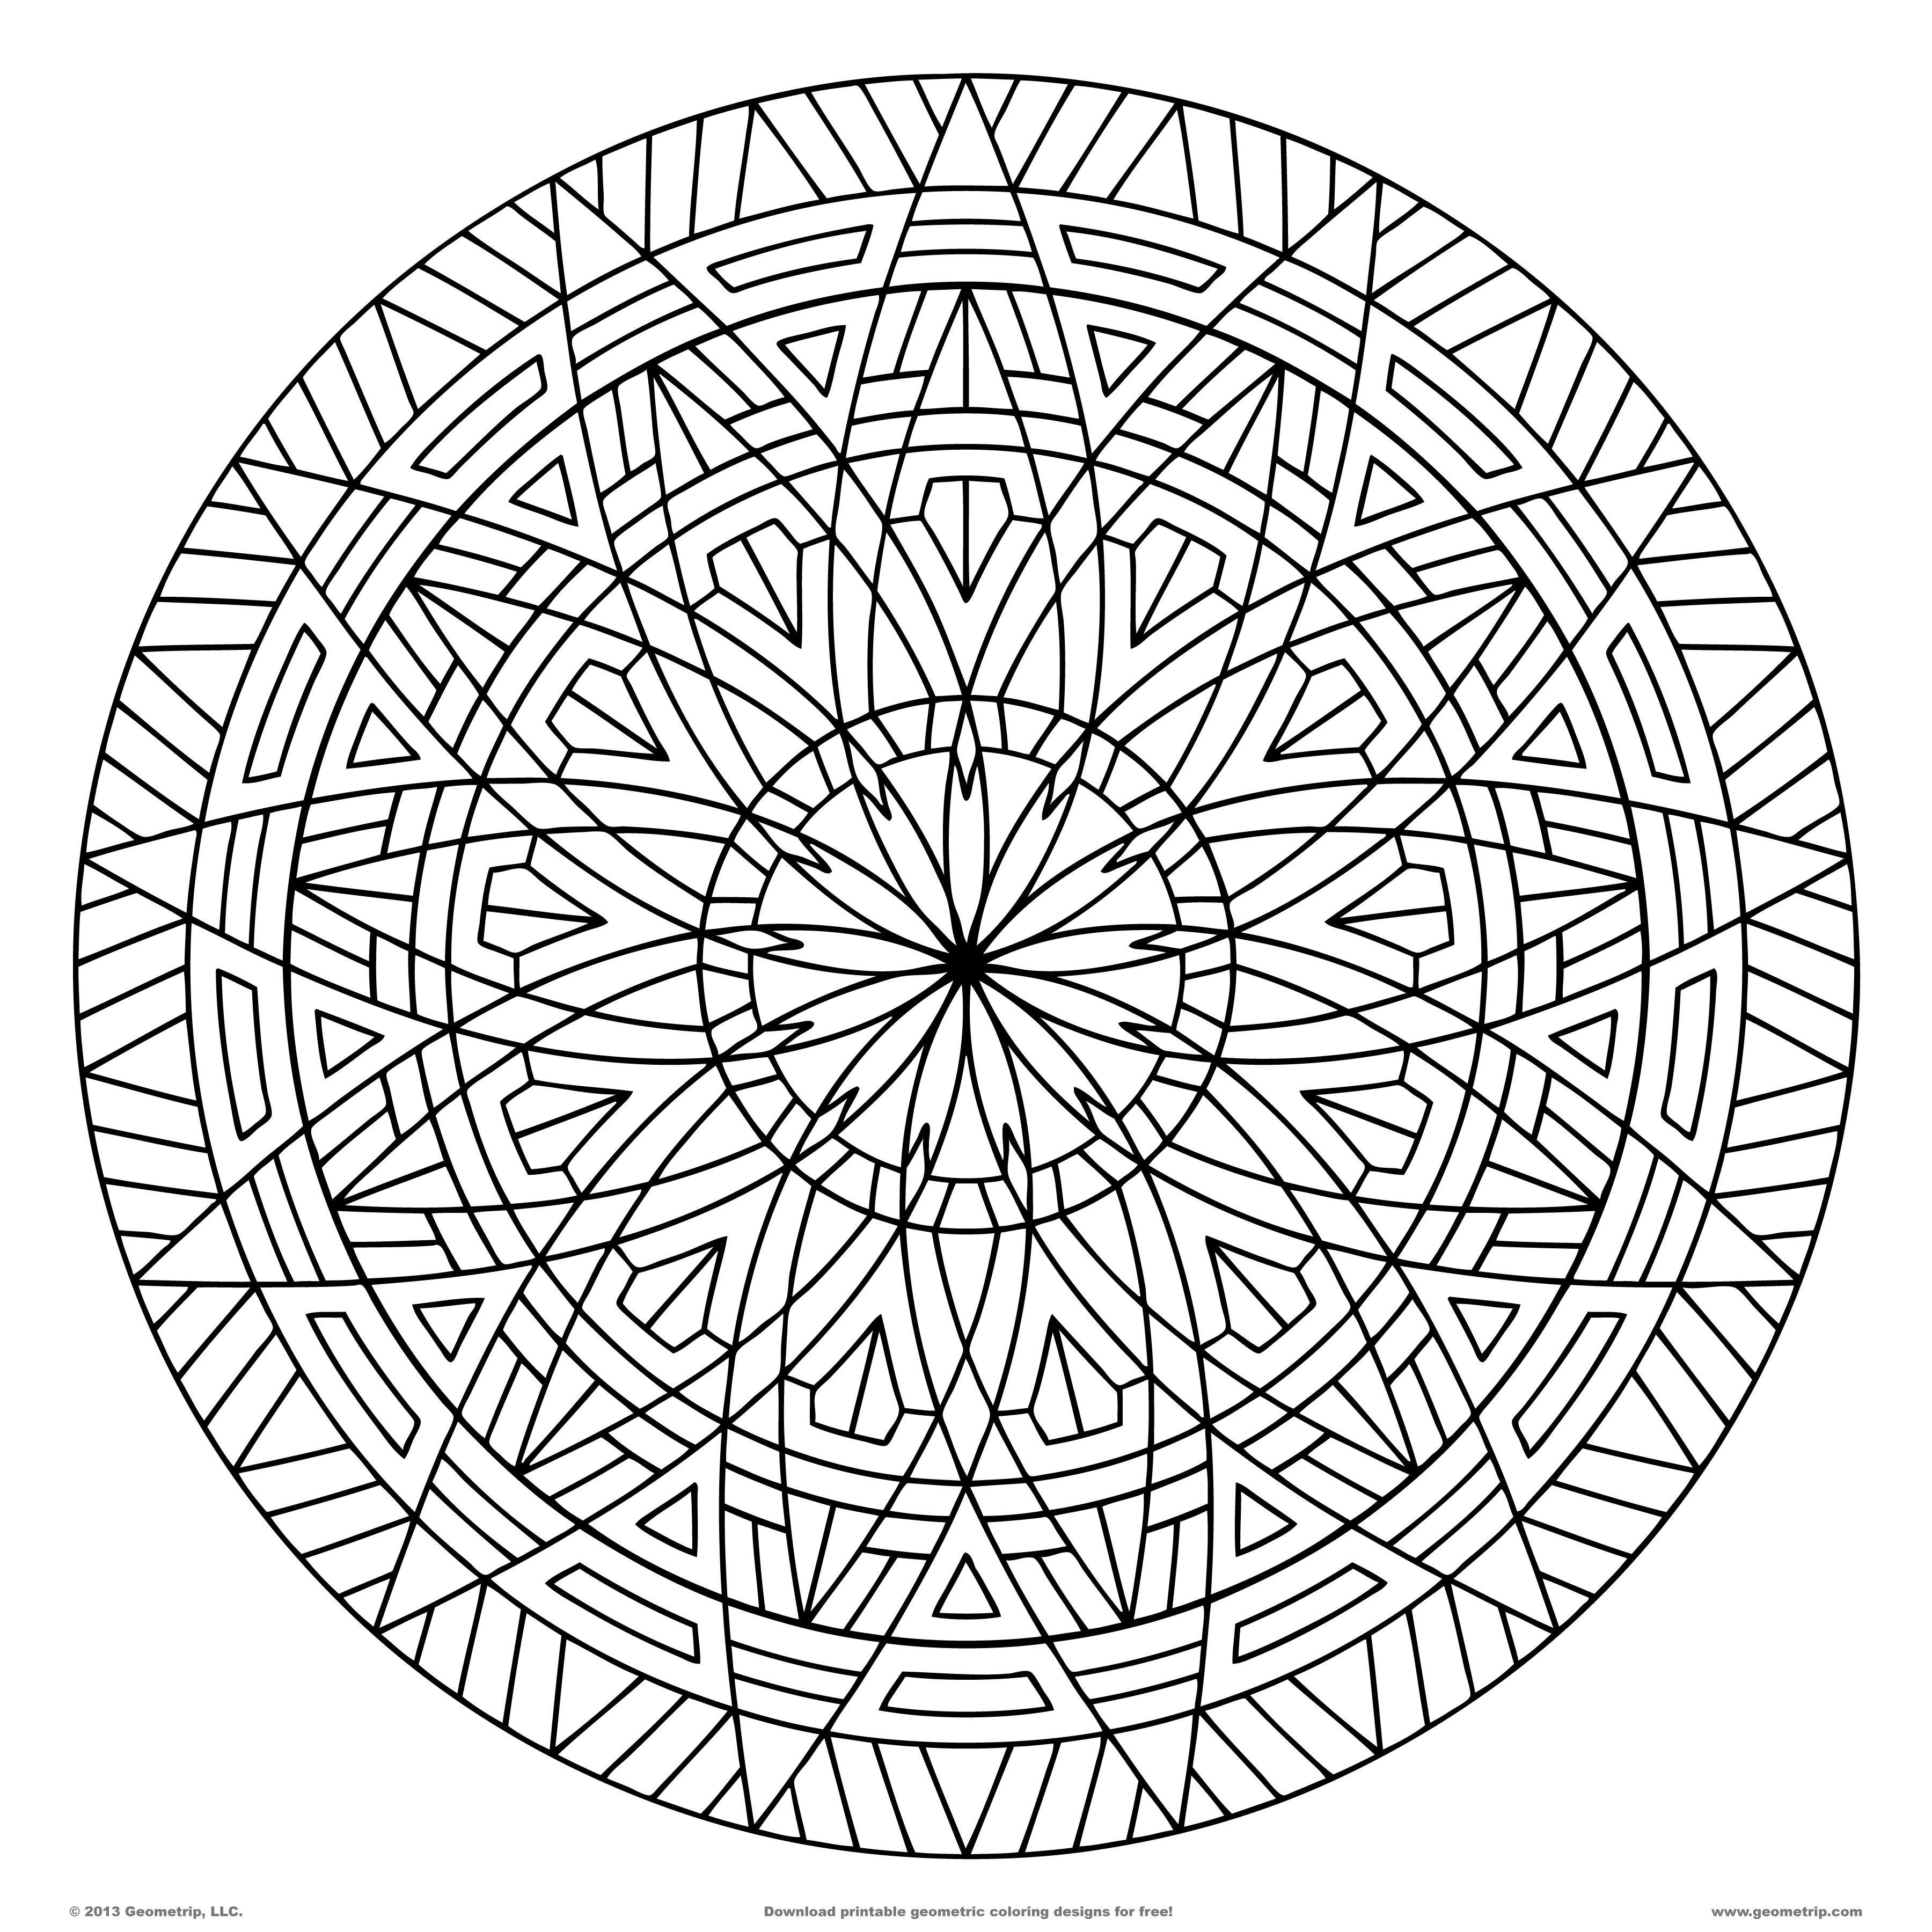 Pattern Coloring Pages For Adults Coloring Home